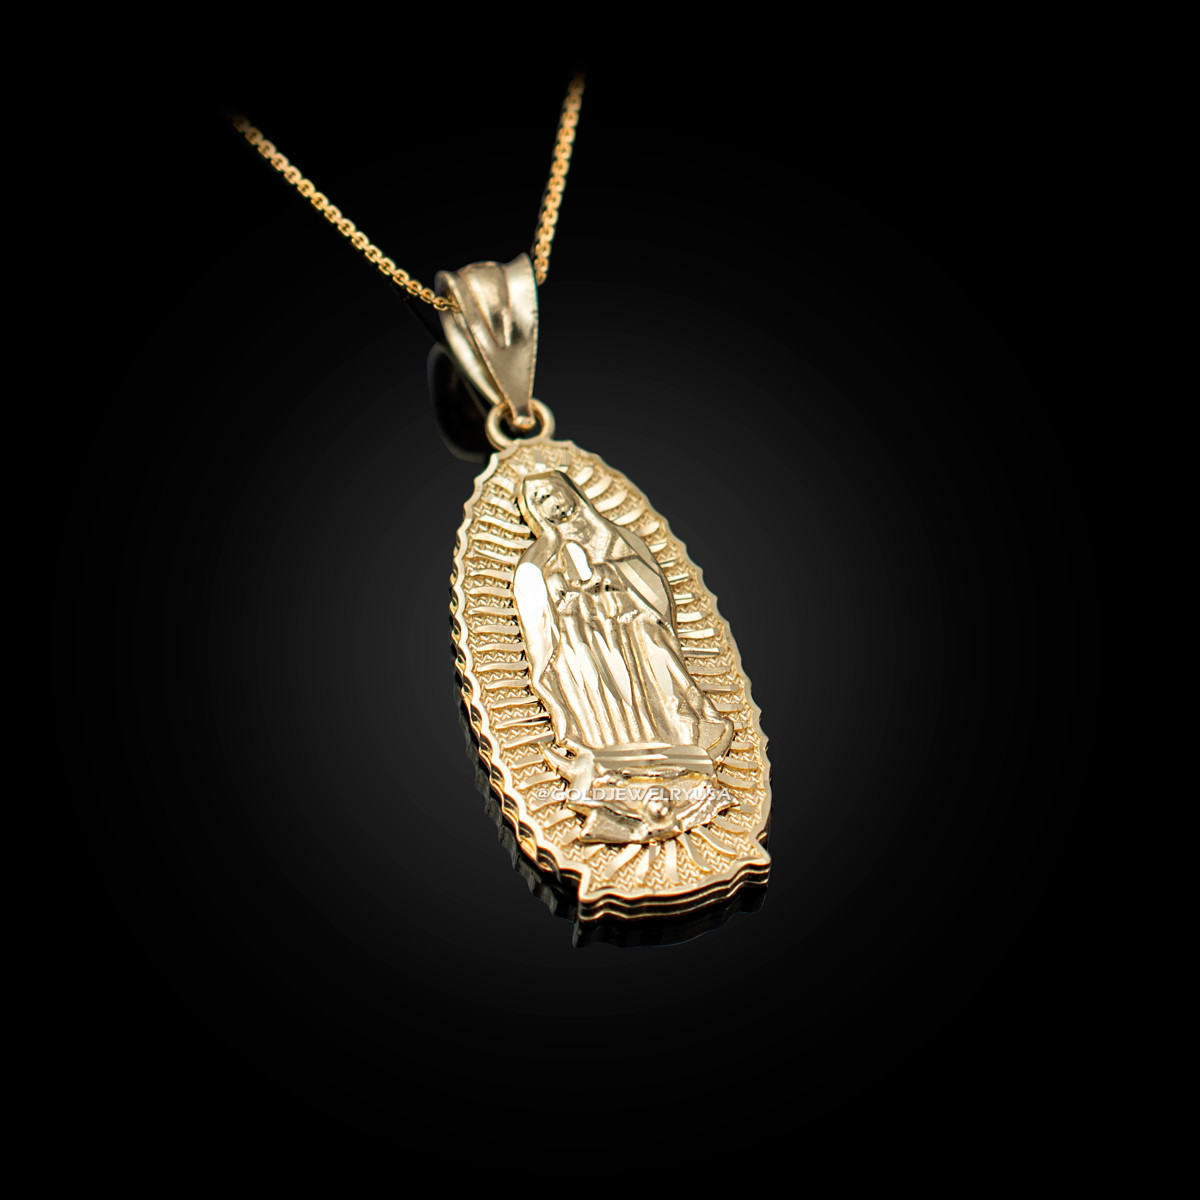 Italia D'Oro Virgin Mary Chain Necklace 14K Yellow Gold | Jared